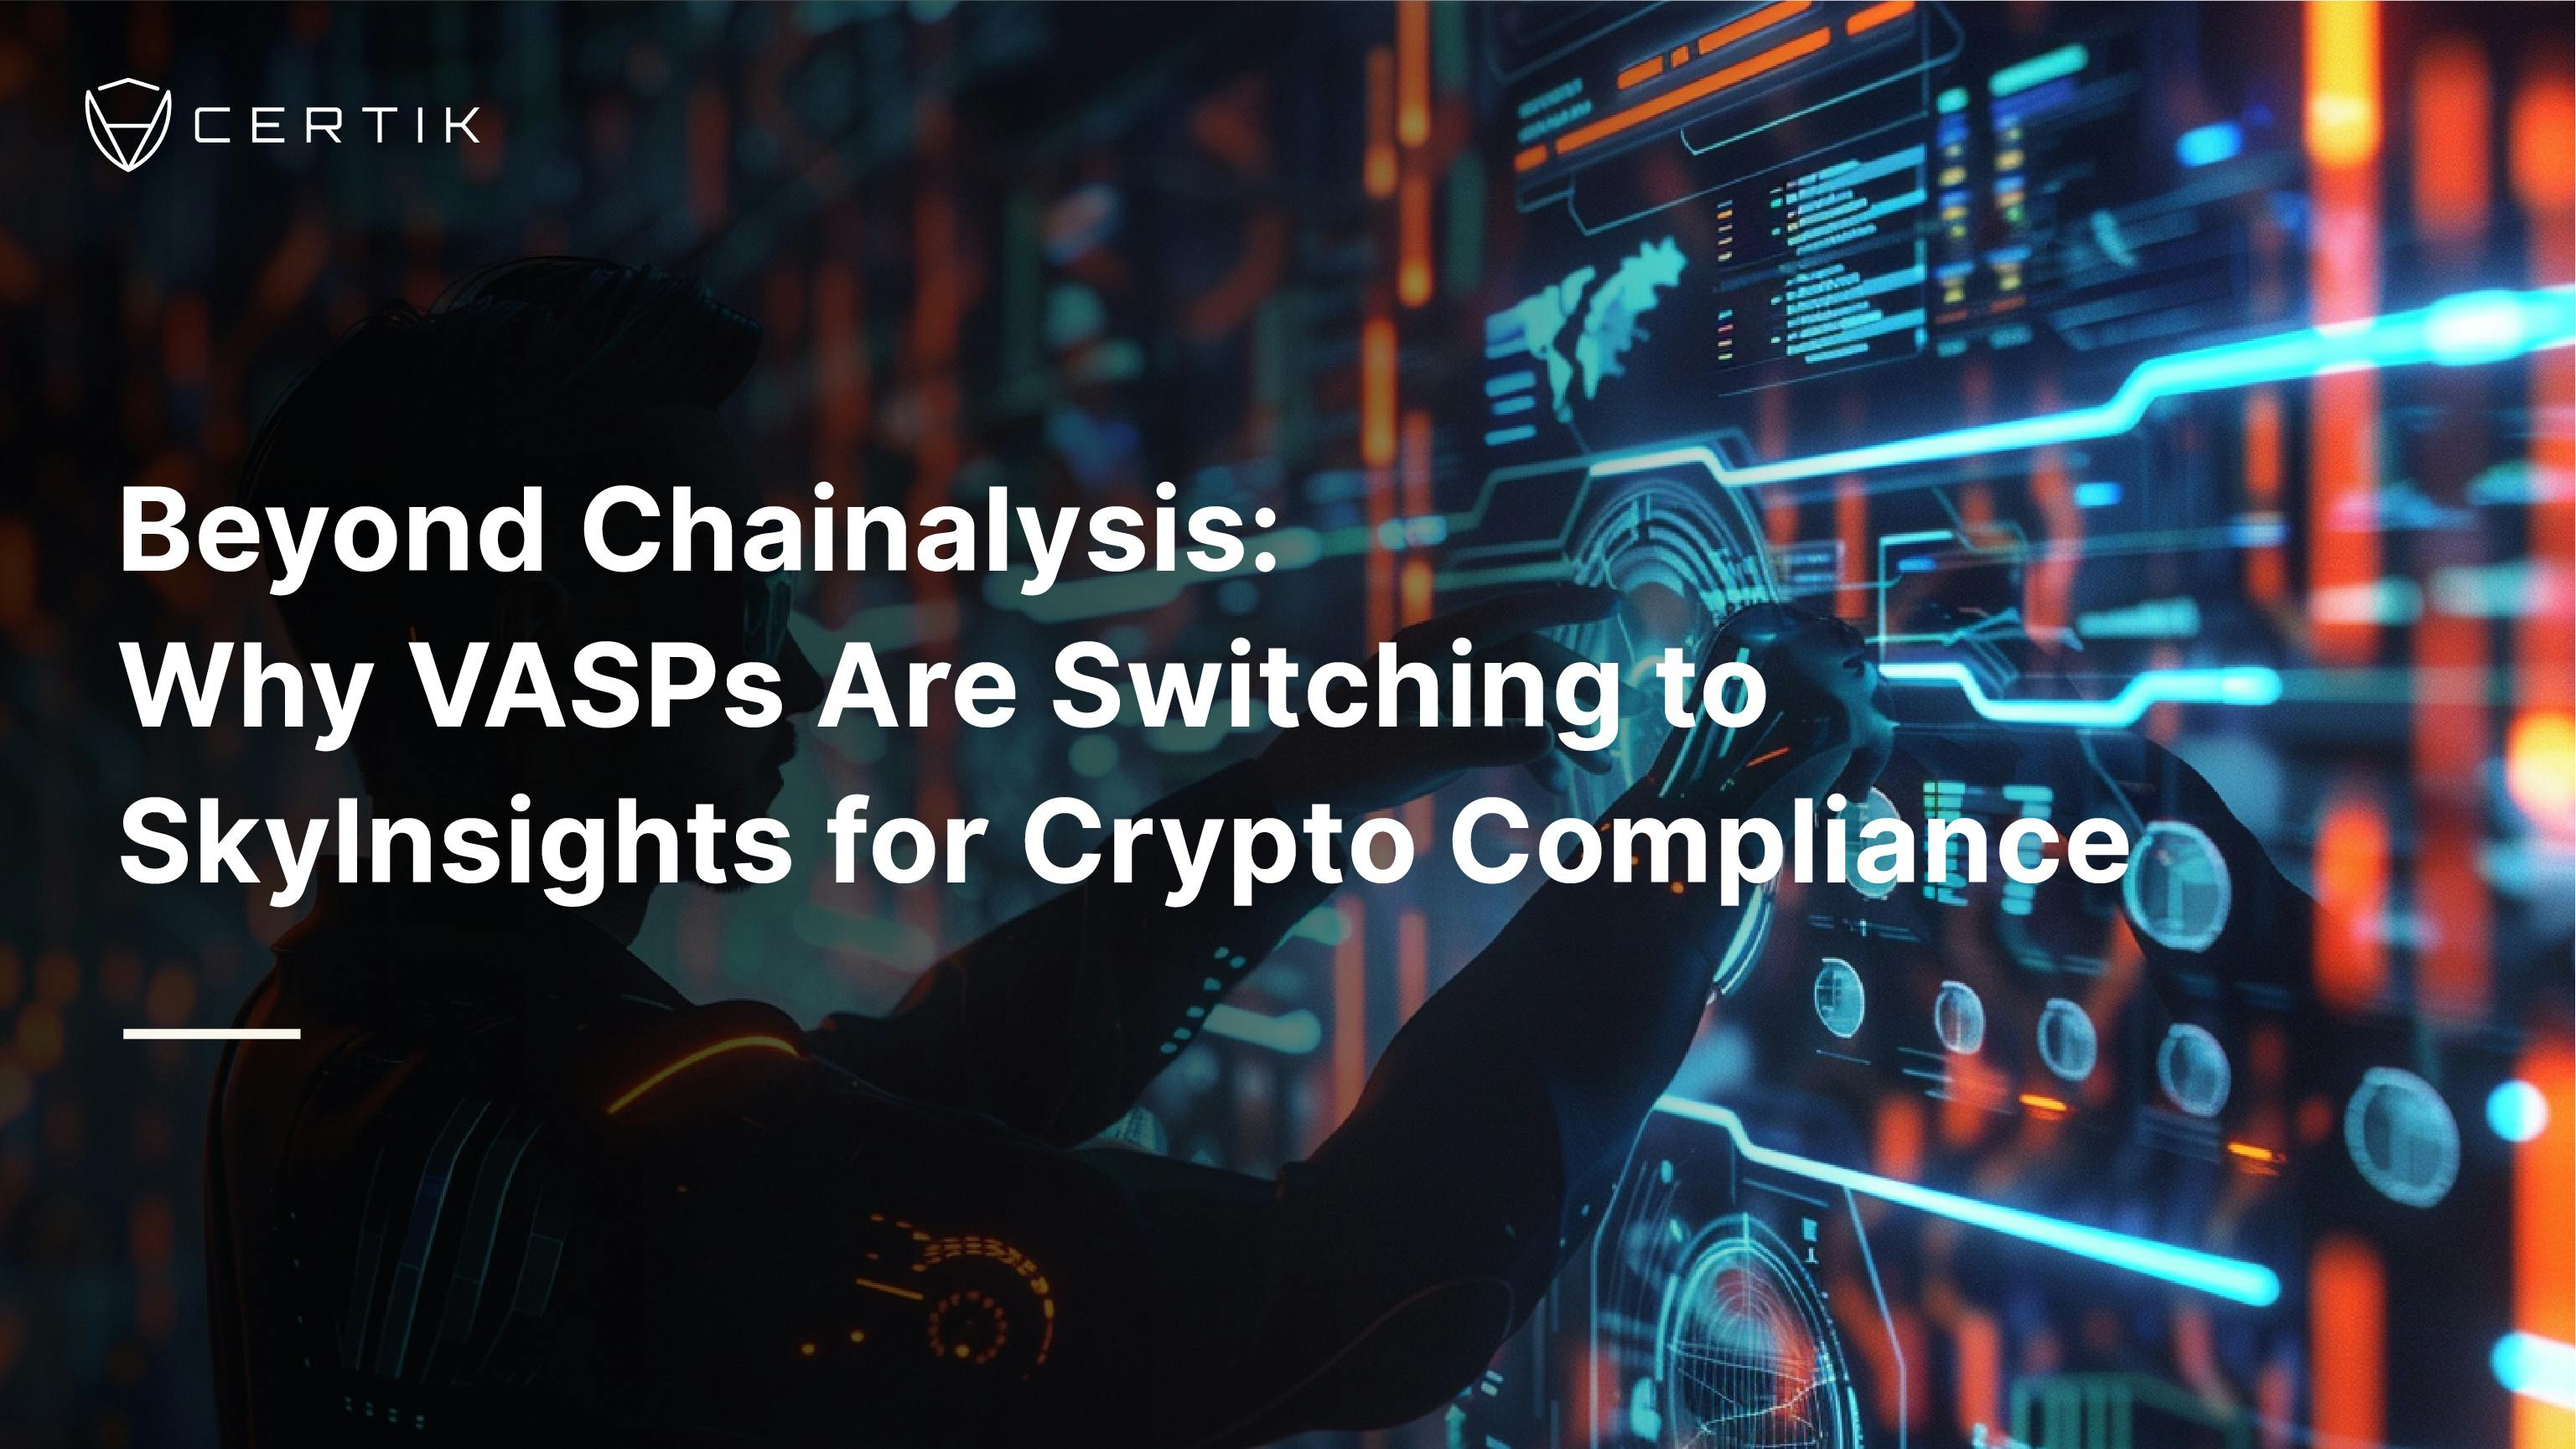 Beyond Chainalysis: Why VASPs Are Switching to SkyInsights for Crypto Compliance